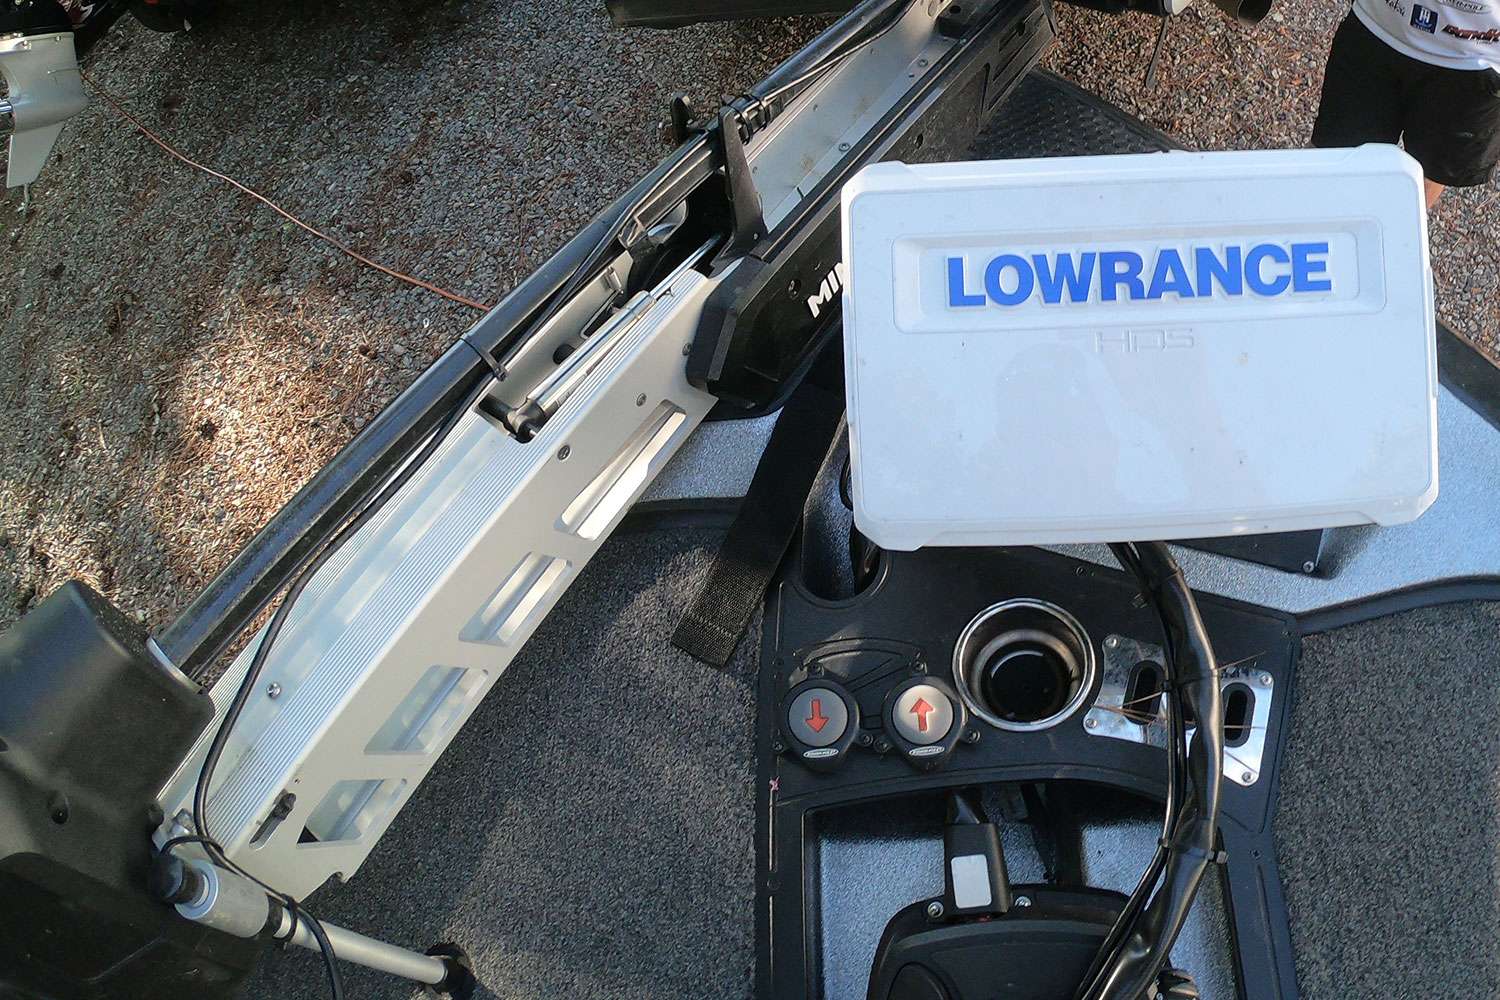 His trolling motor is complimented with a Lowrance HDS 12, a location where he spends a tremendous amount of time. 